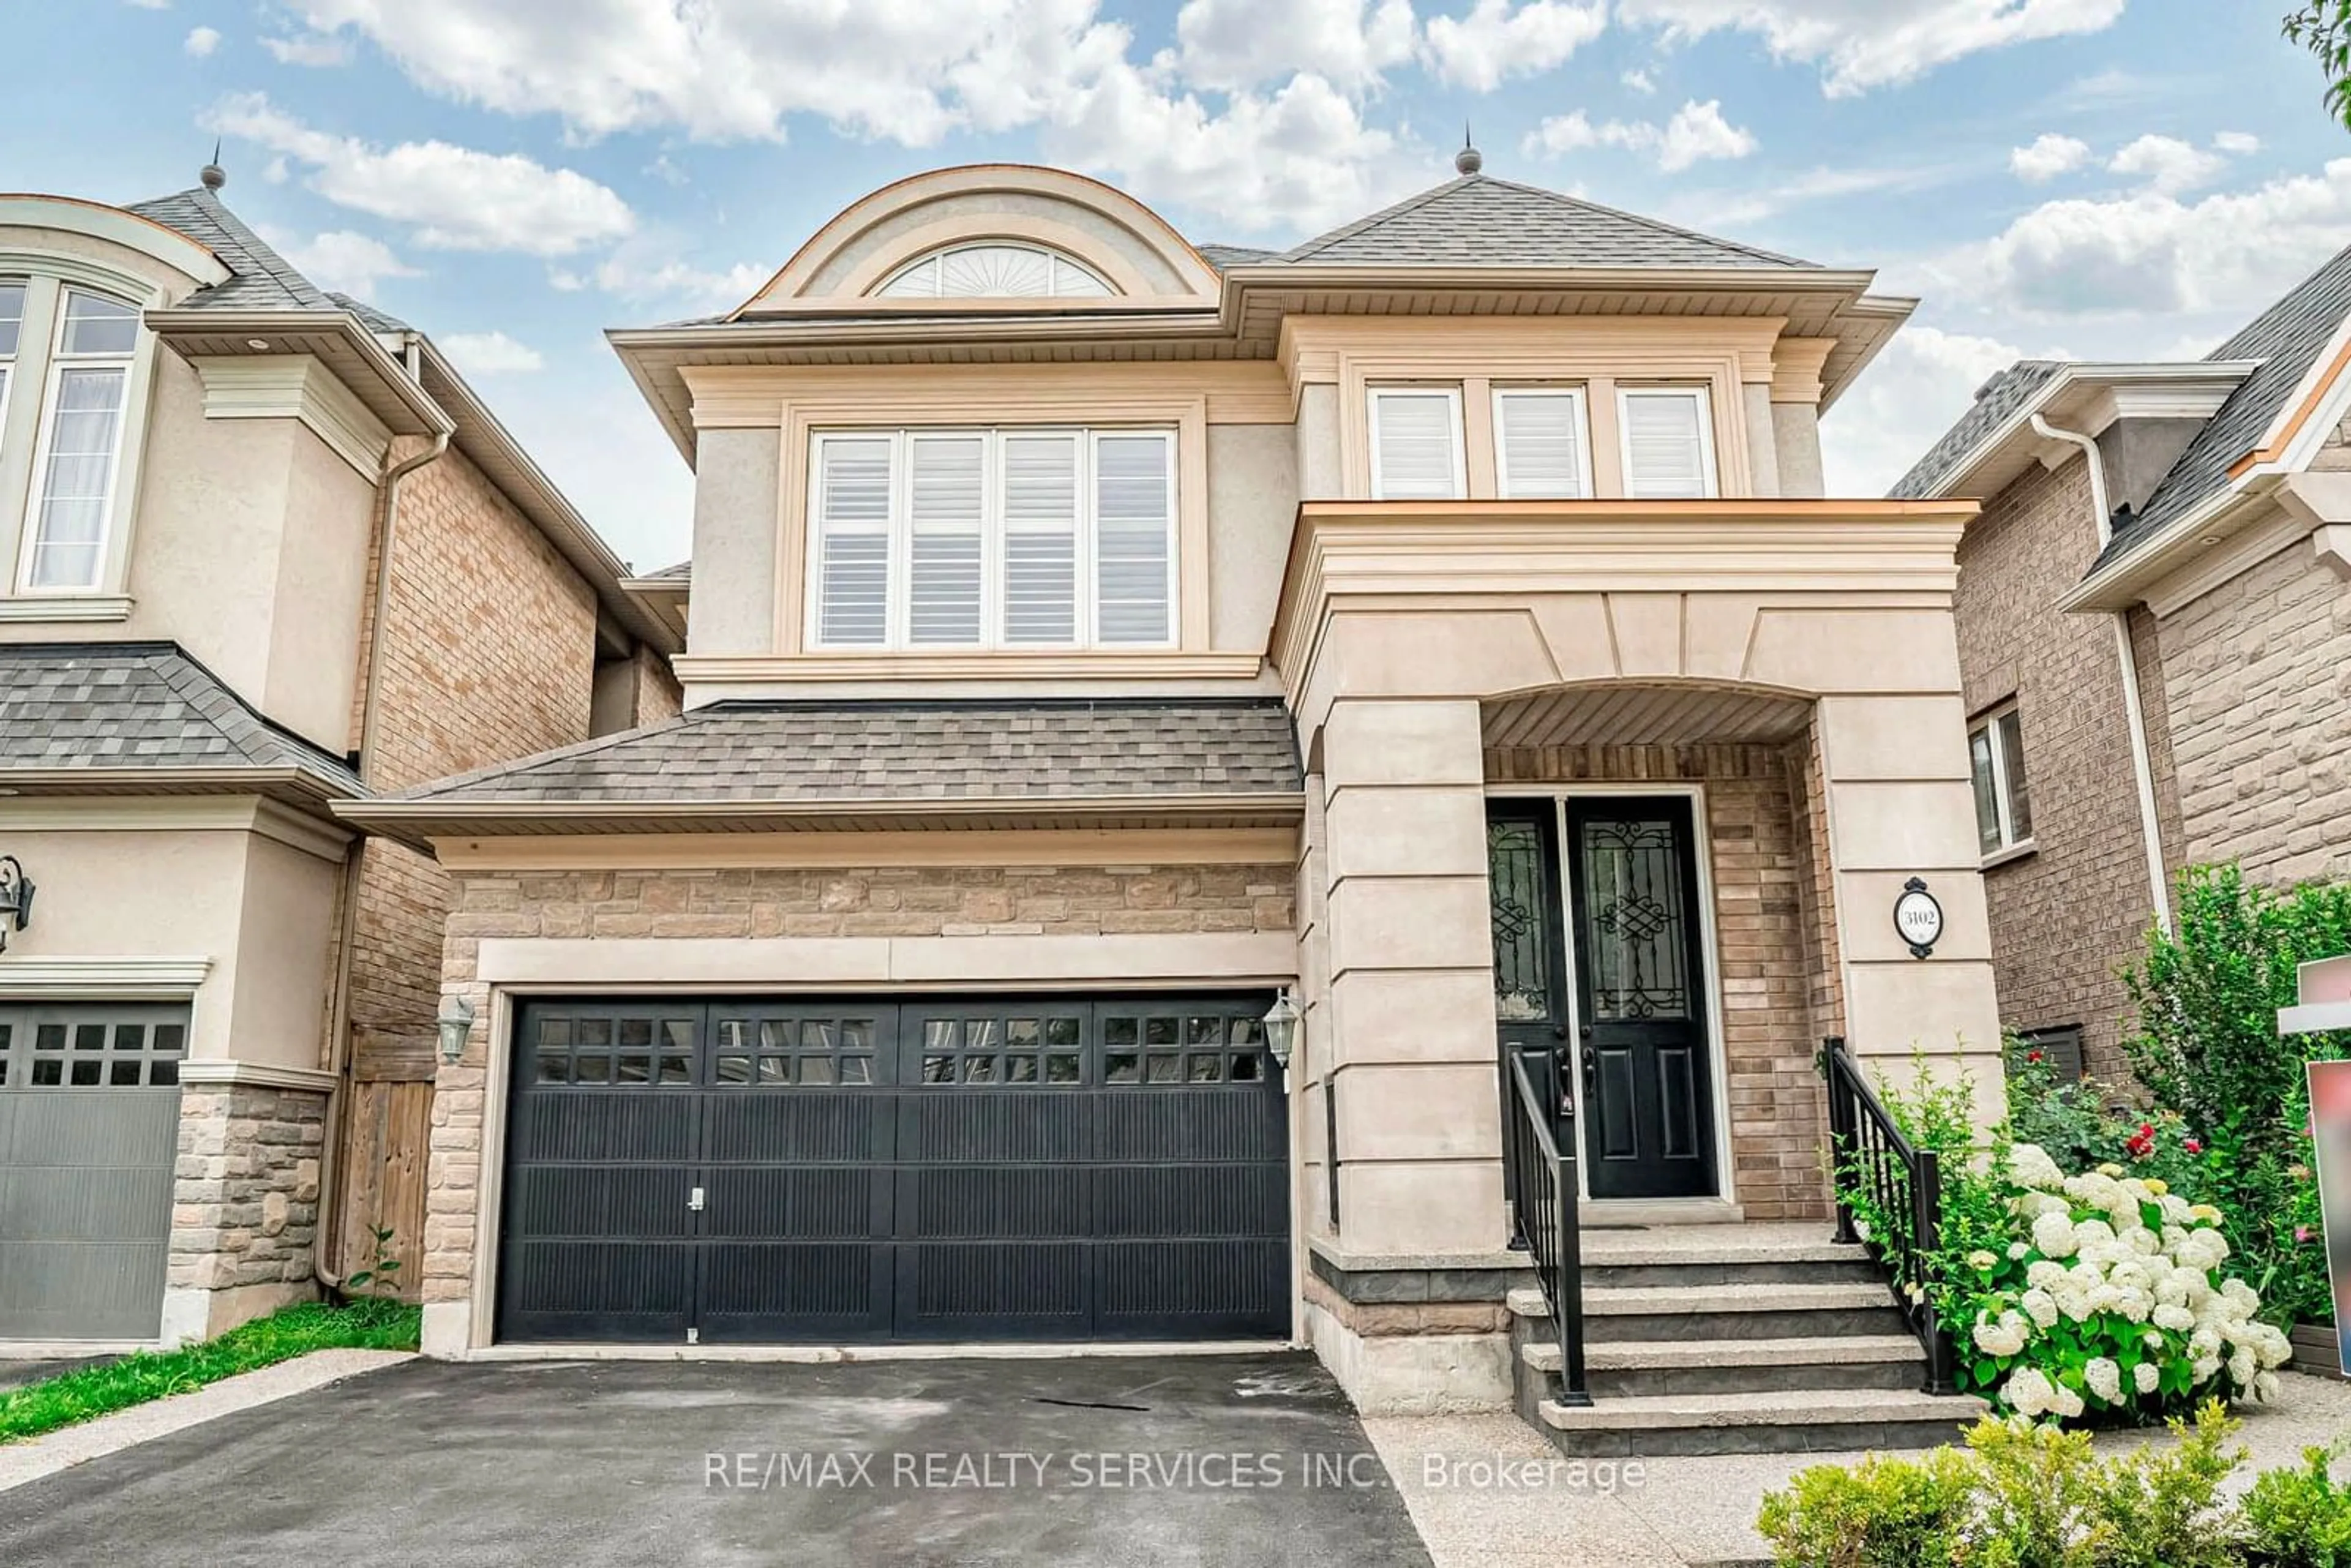 Home with brick exterior material for 3102 Gladeside Ave, Oakville Ontario L6M 0P8